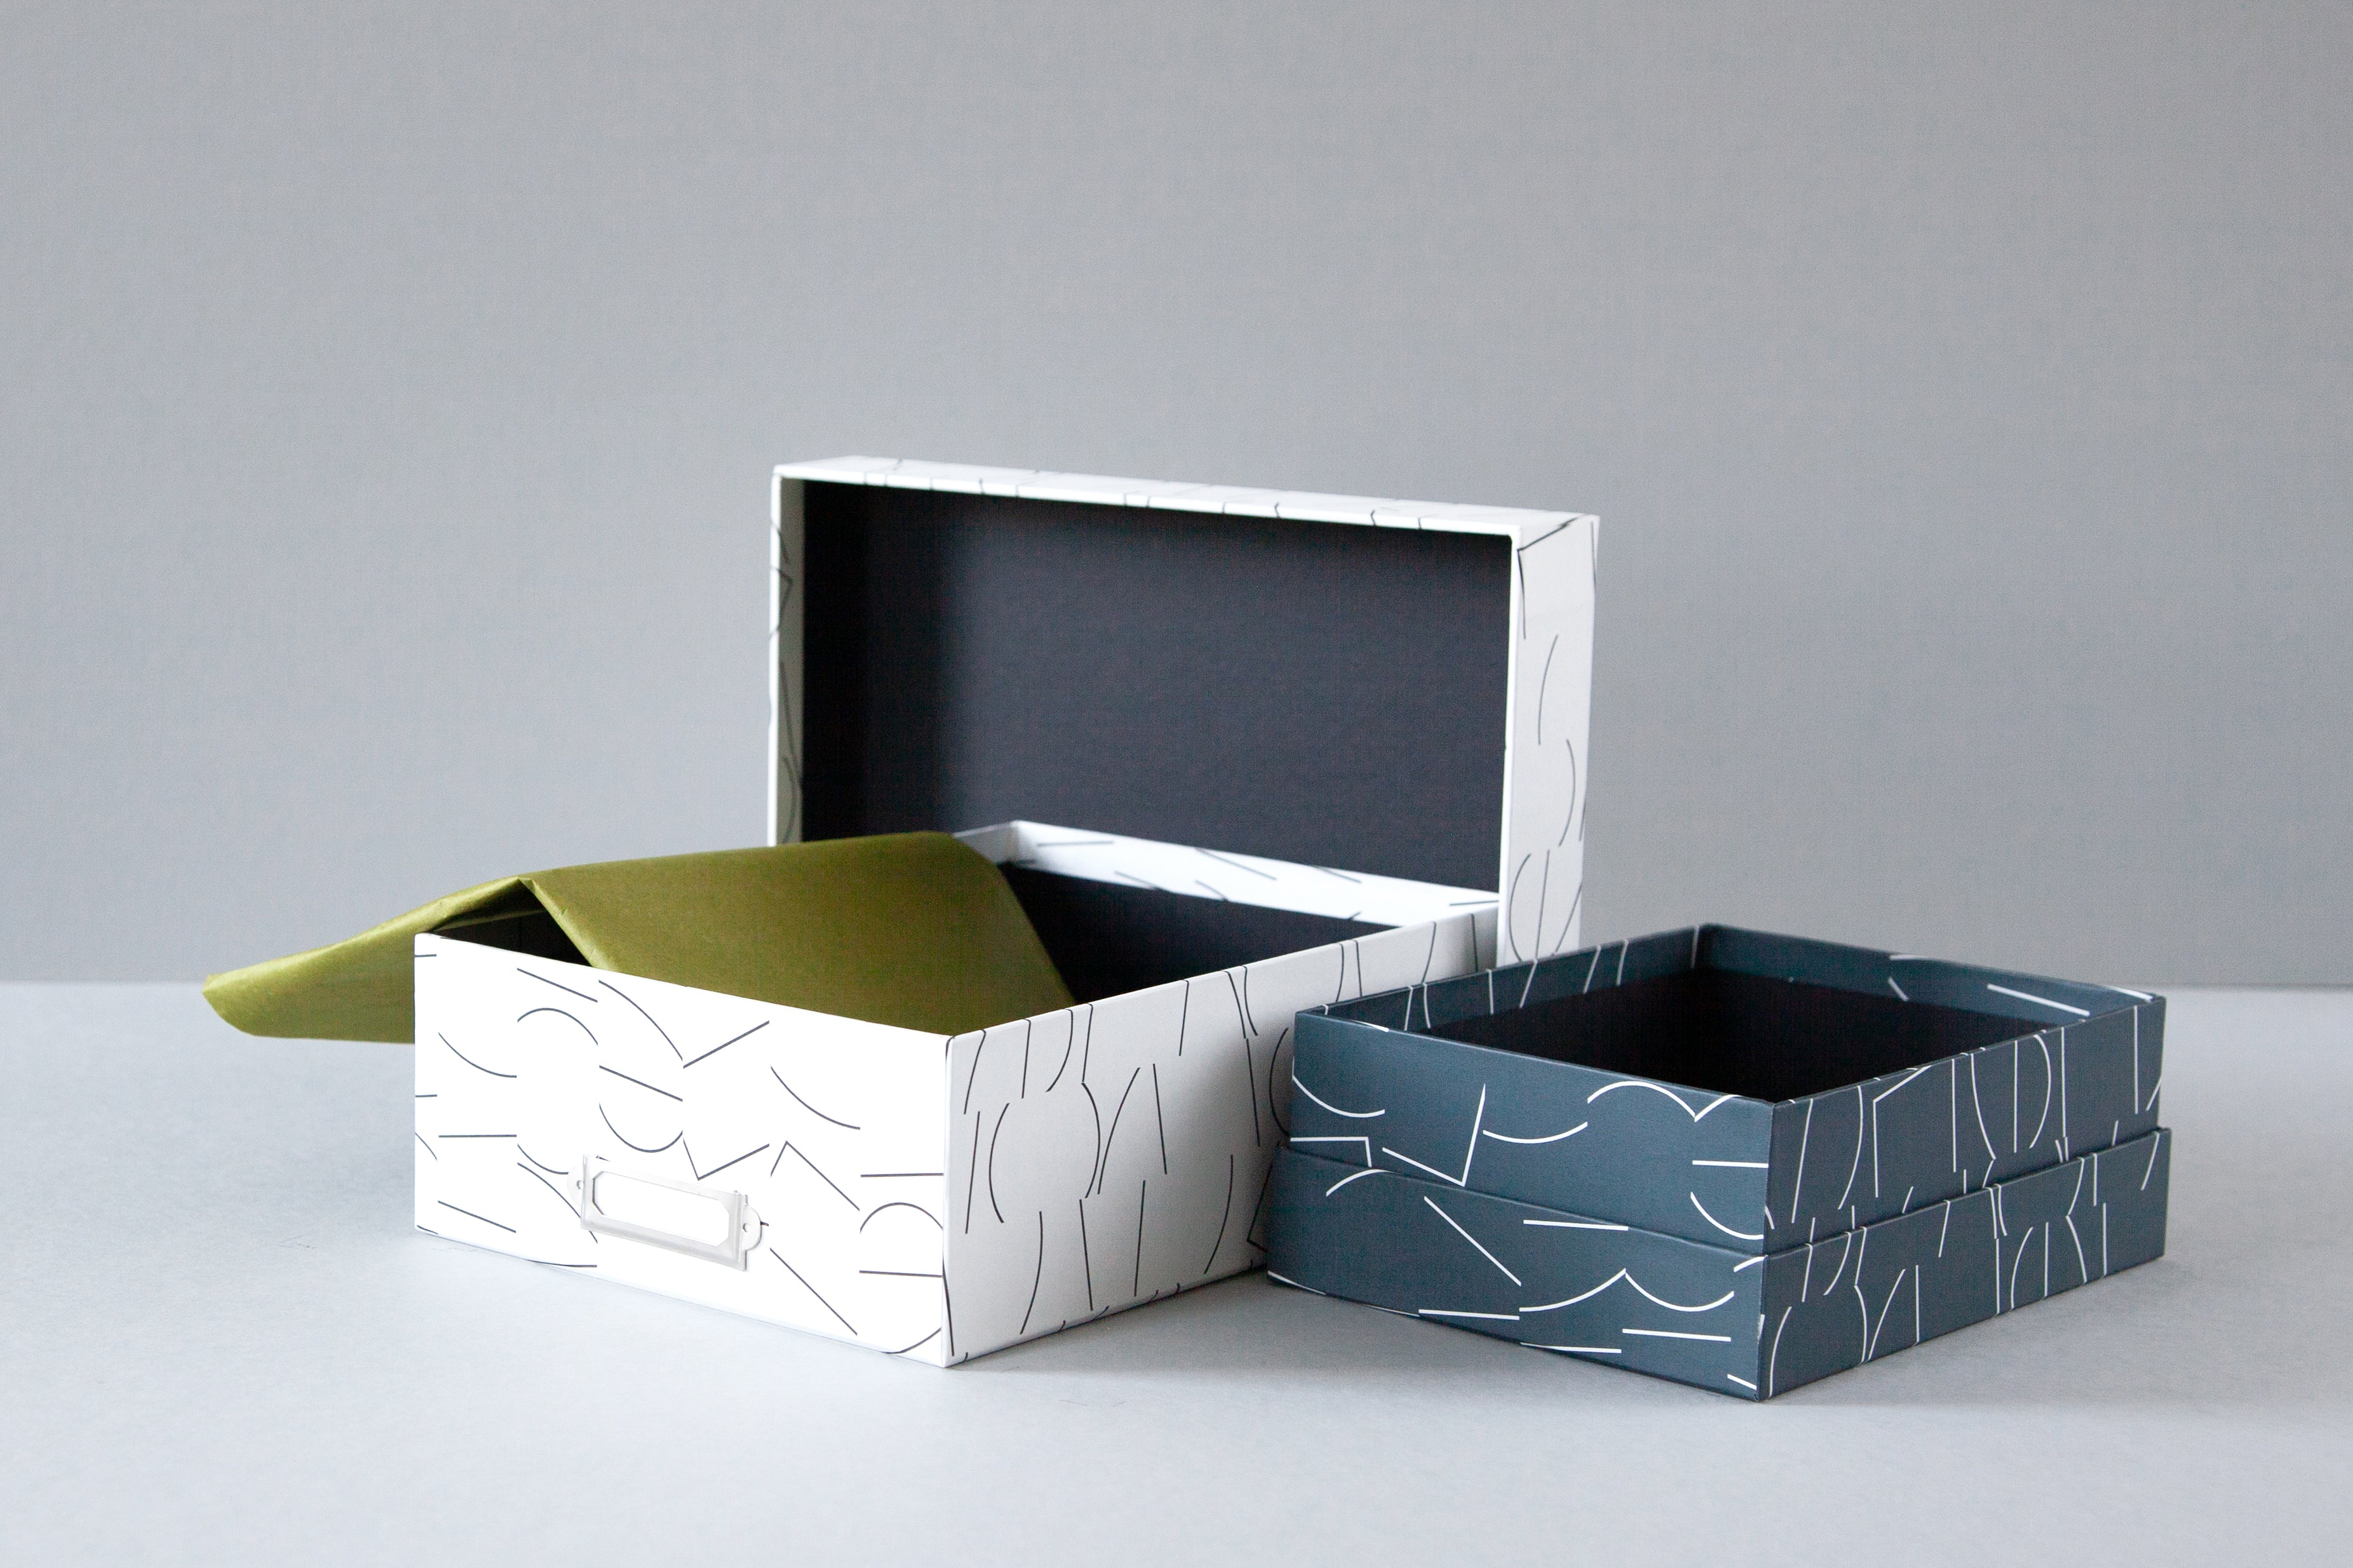 Set of 2 Archive Storage Boxes by Ola | Two styles to choose from - Lifestory - ola